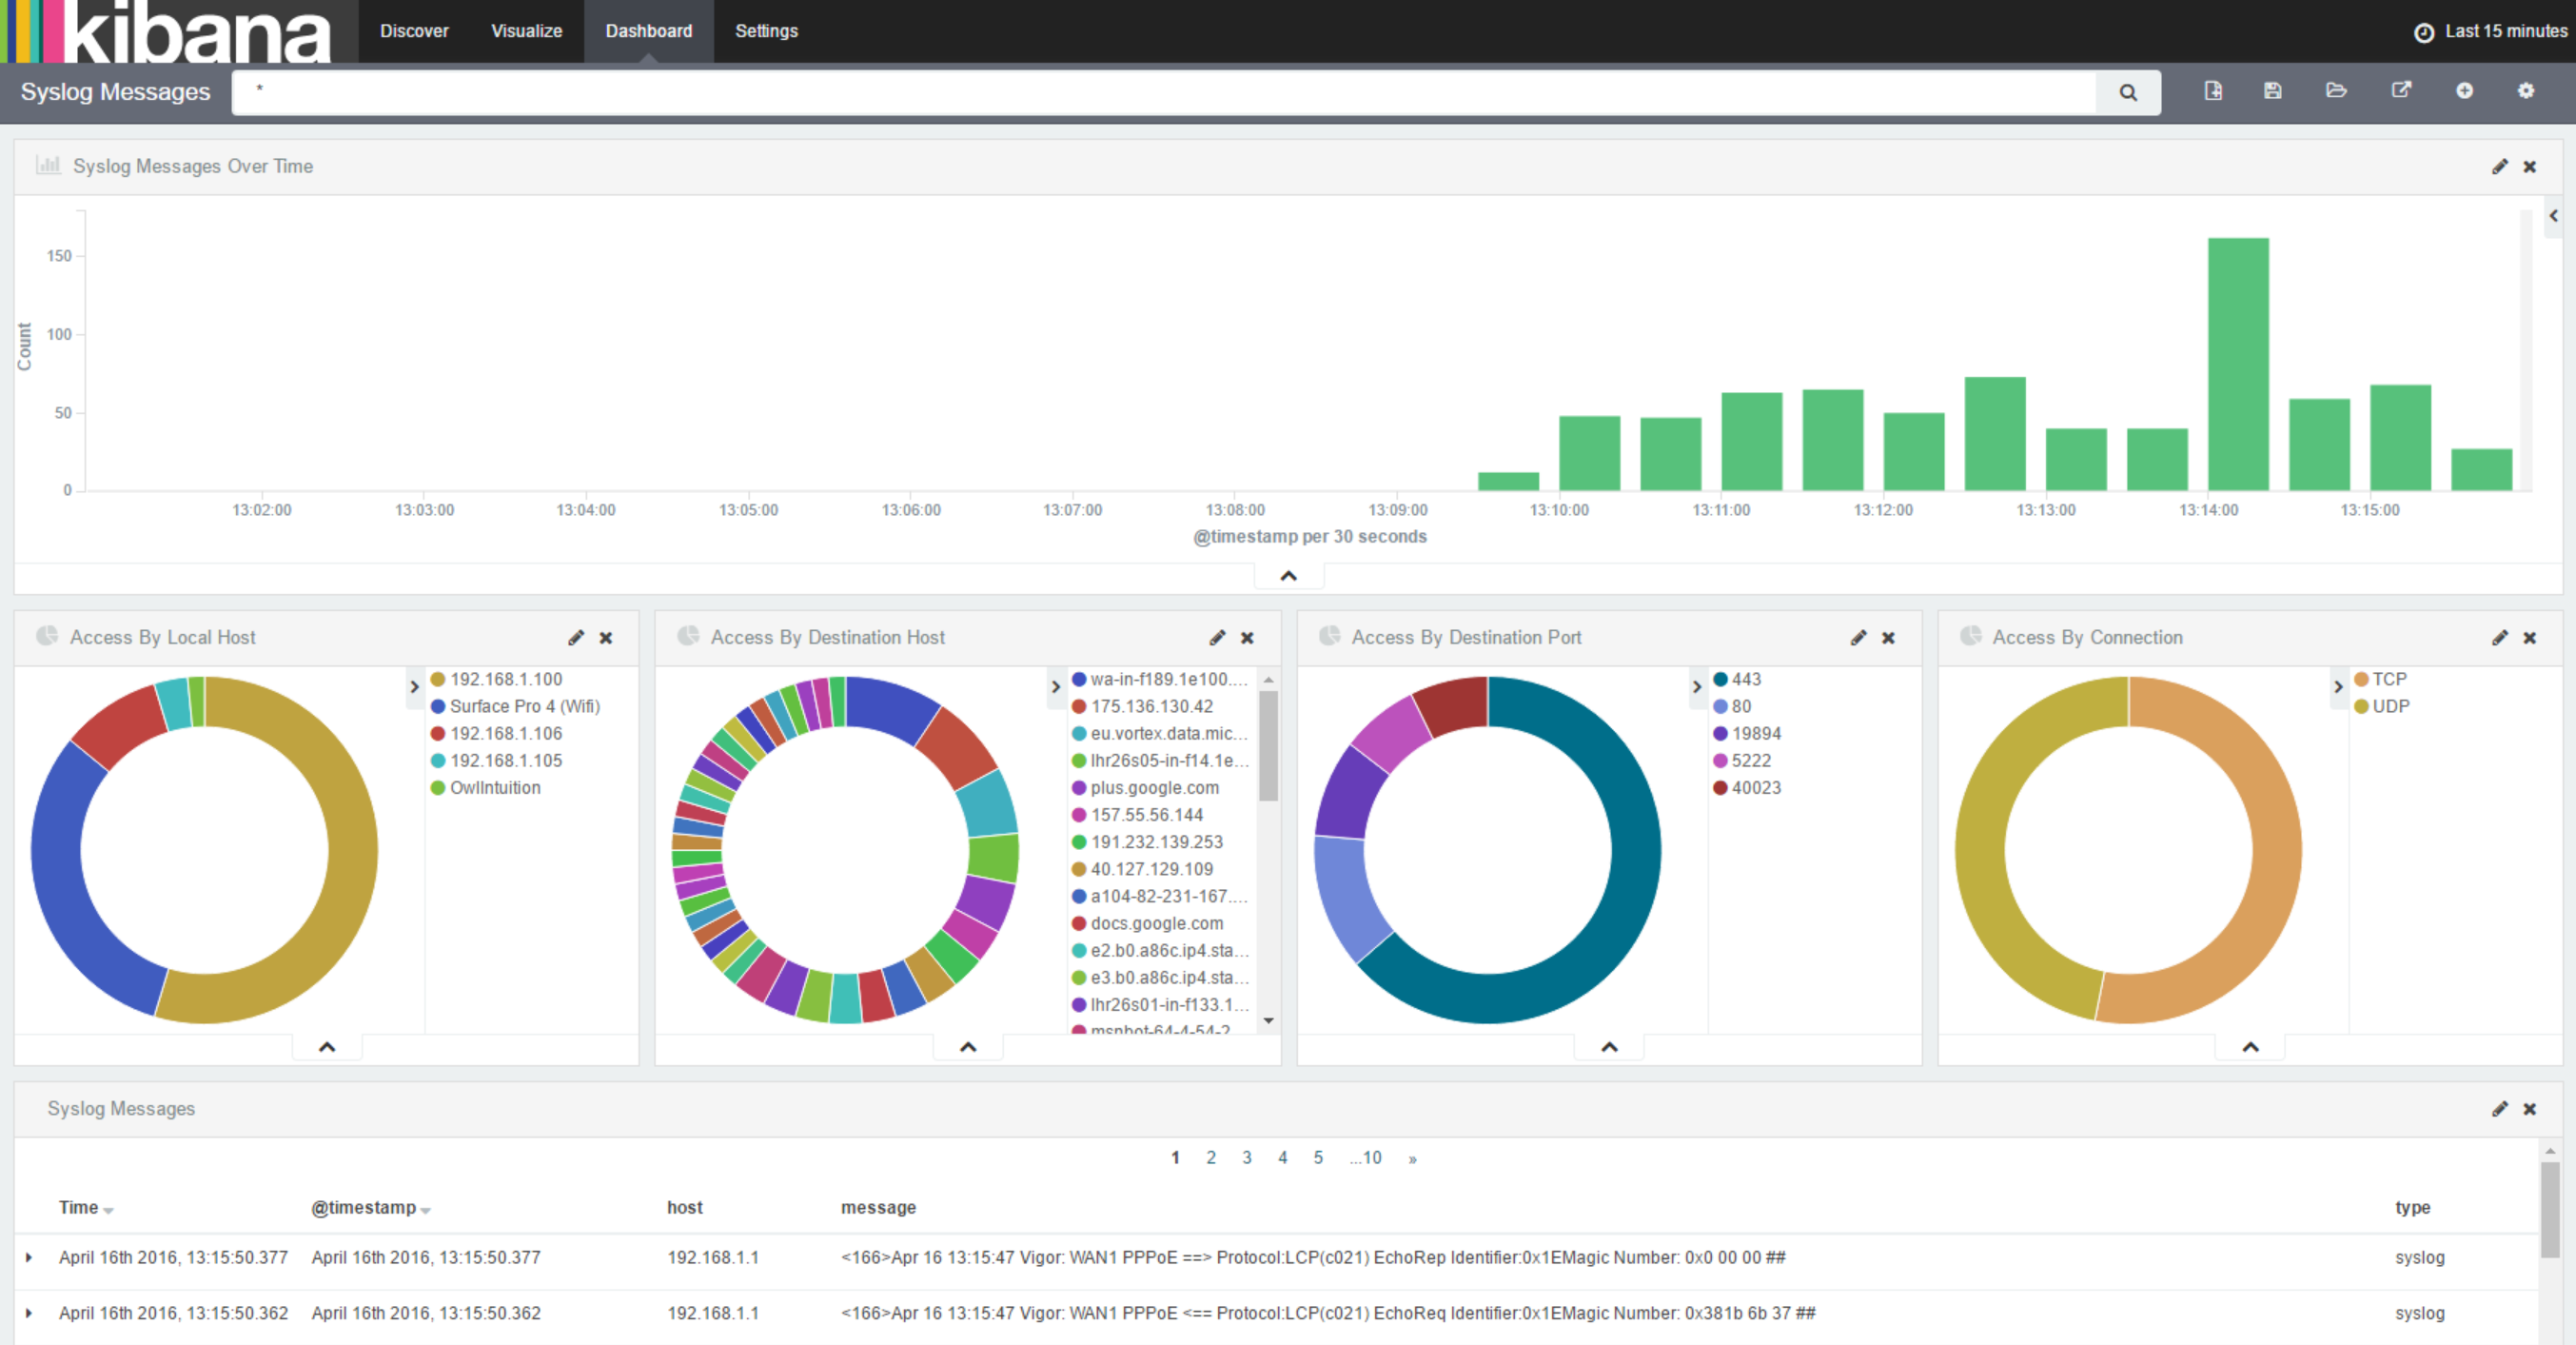 Kibana Dashboard With Access By Local Host